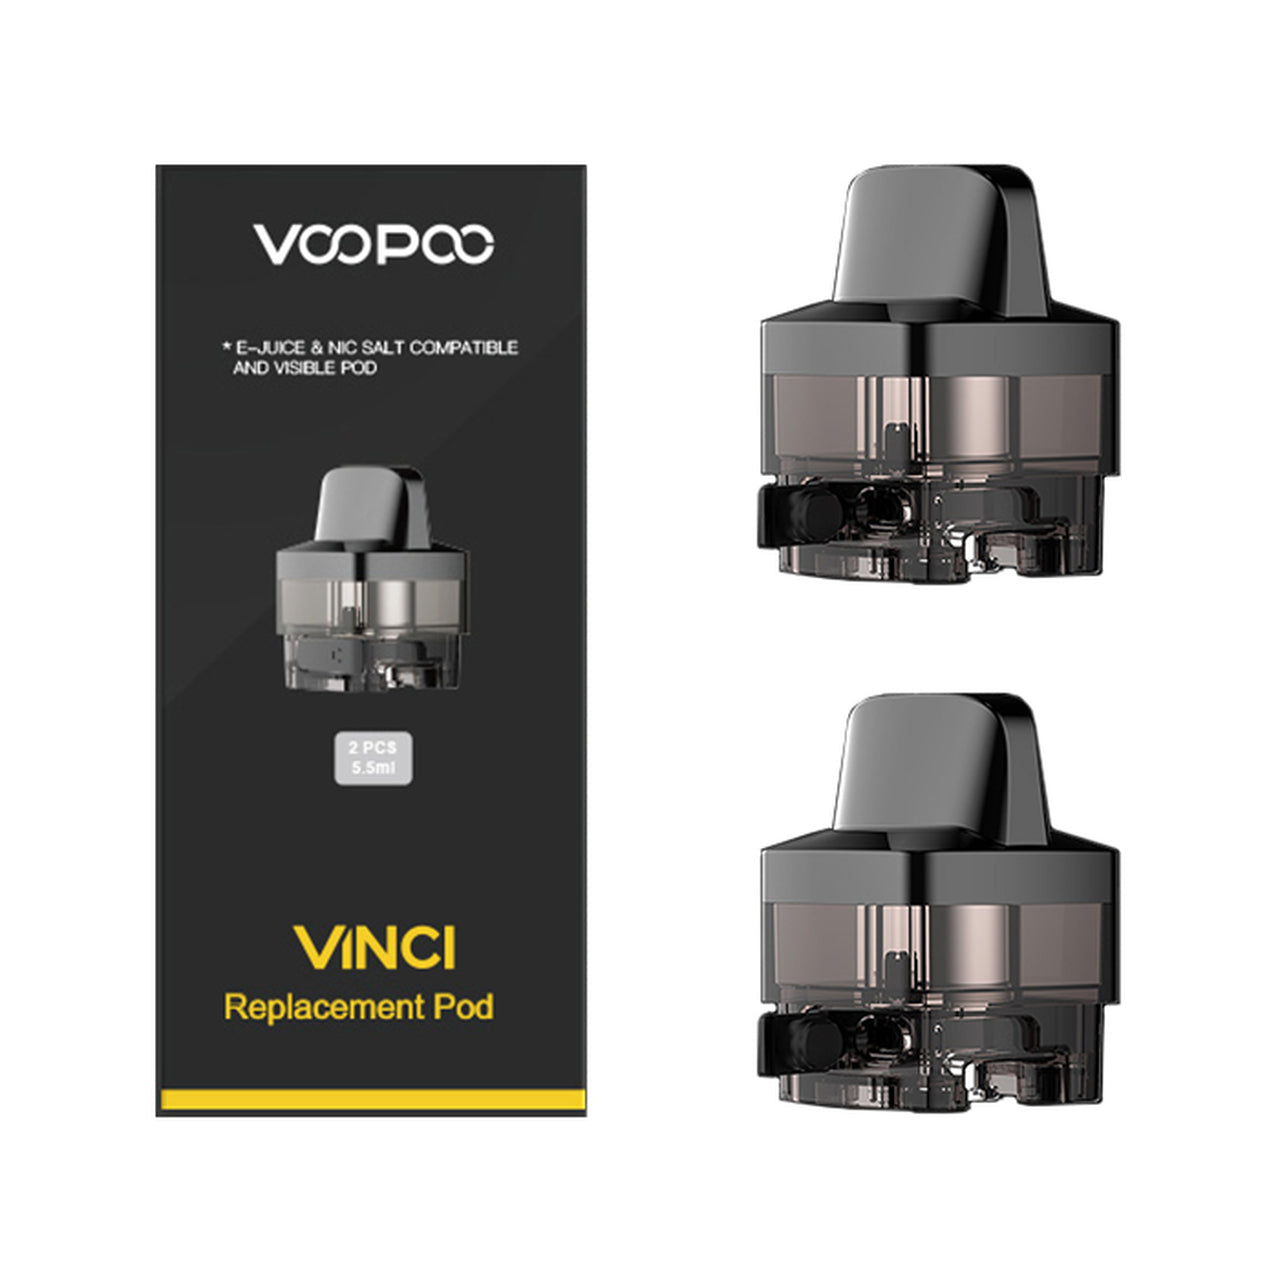 VOOPOO - Vinci 5.5ml Replacement Pod Without Coil - 2 Pack